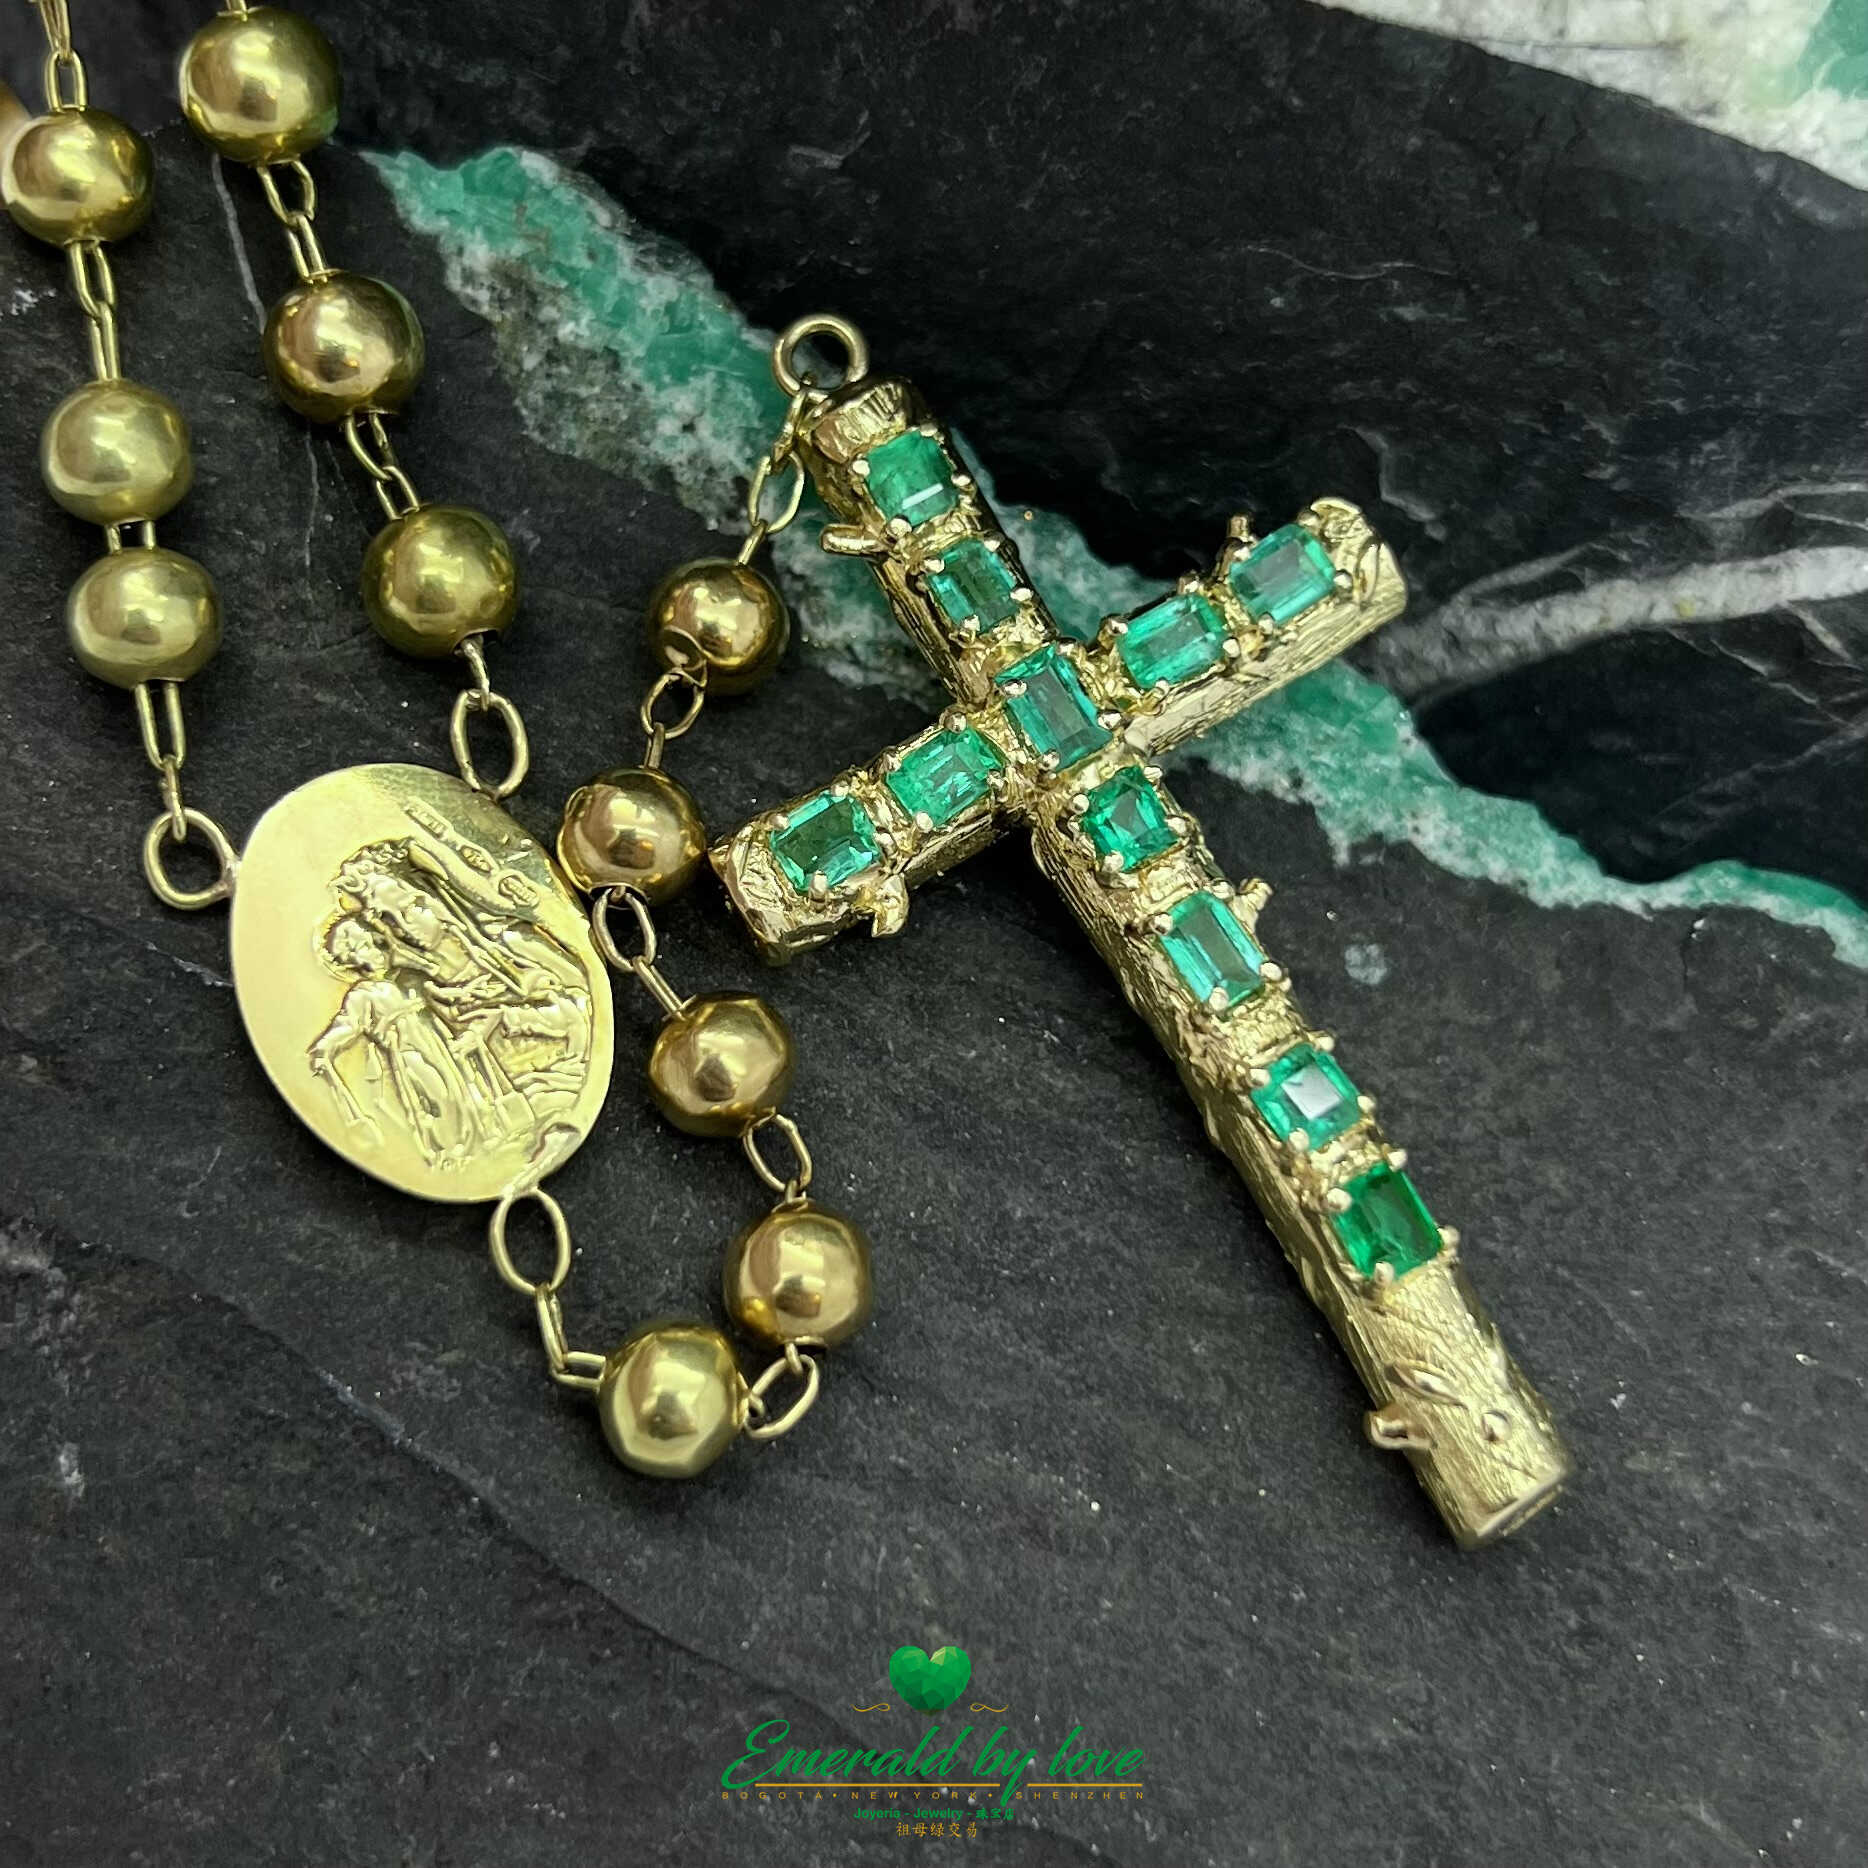 Opulent 18K Yellow Gold Rosary with Emeralds - A Timeless Expression of Devotion